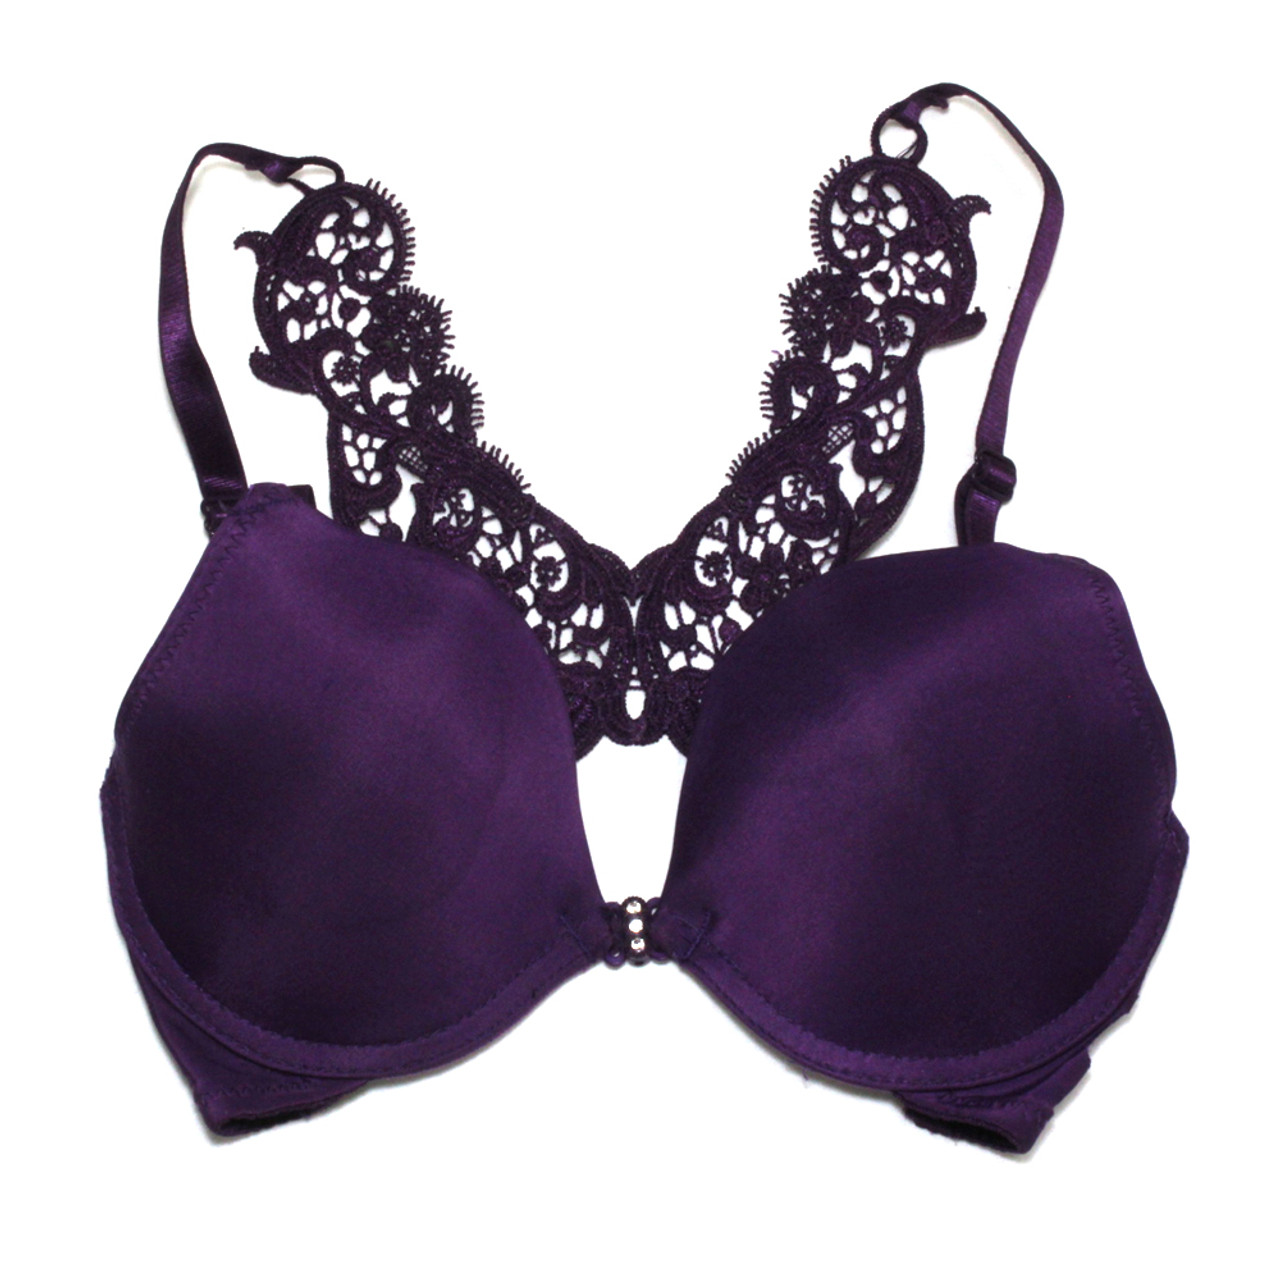 216 Wholesale Ettumamia Ladies Lace PusH-Up Bra - B CuP-Box Only - at 